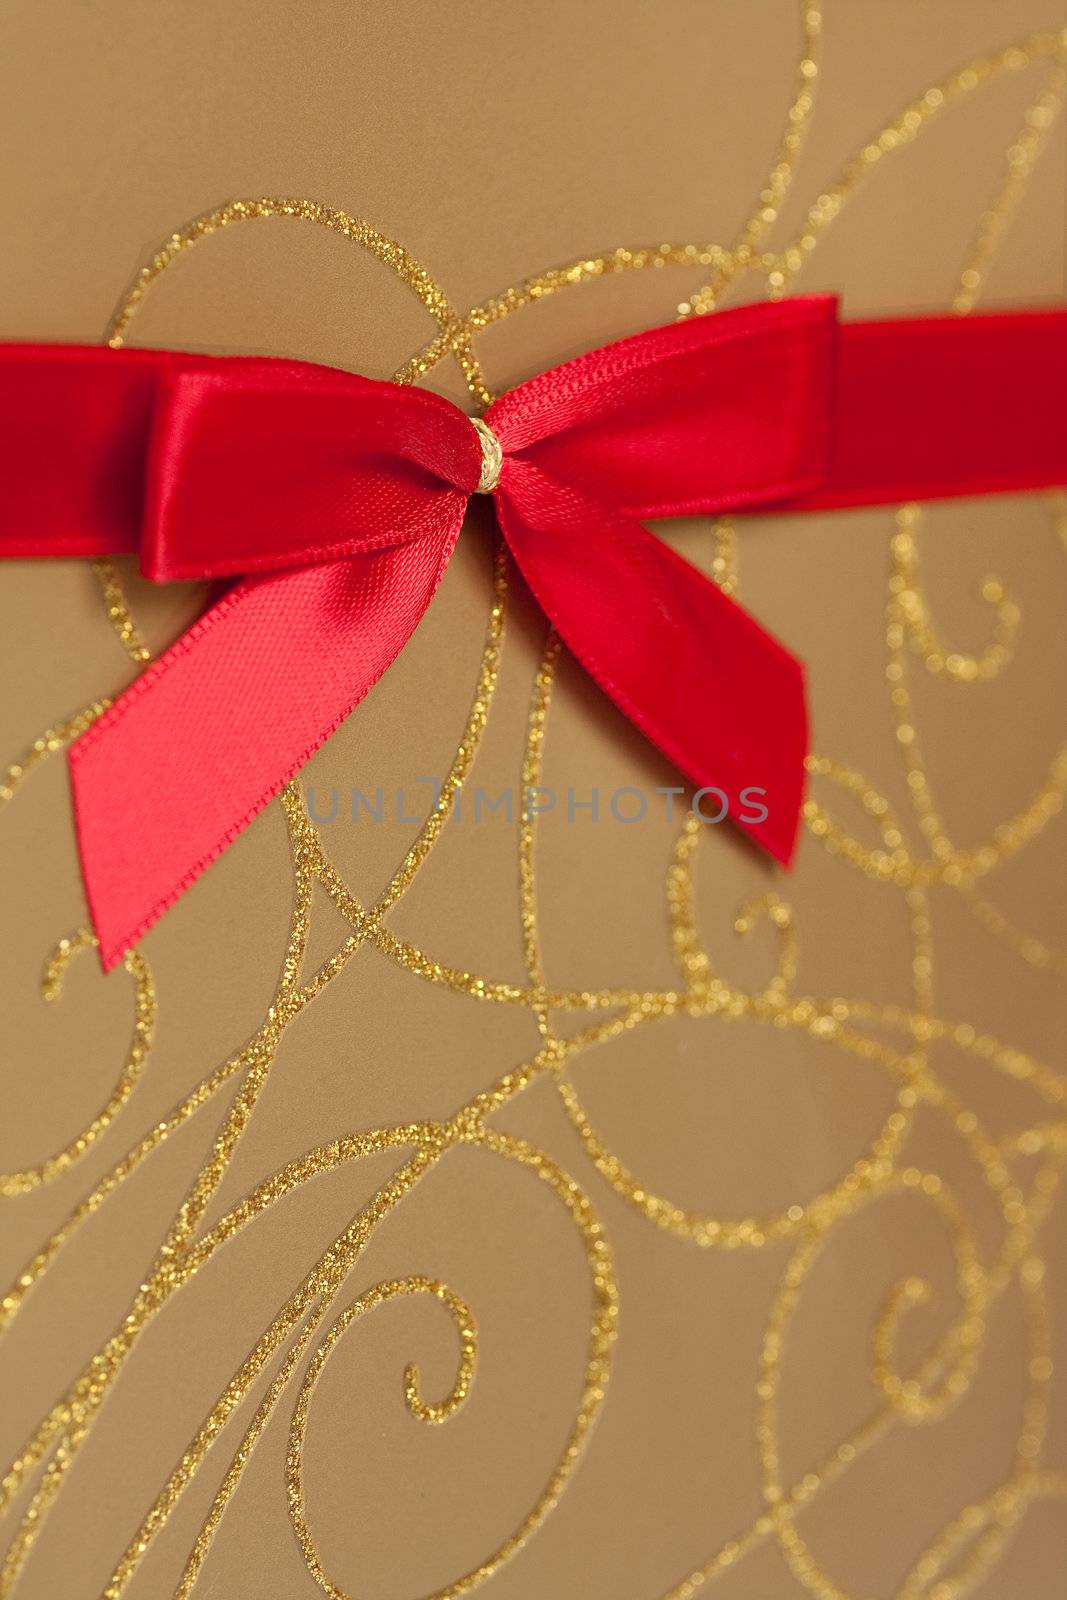 Detail of gold wrapped present with red bow decoration